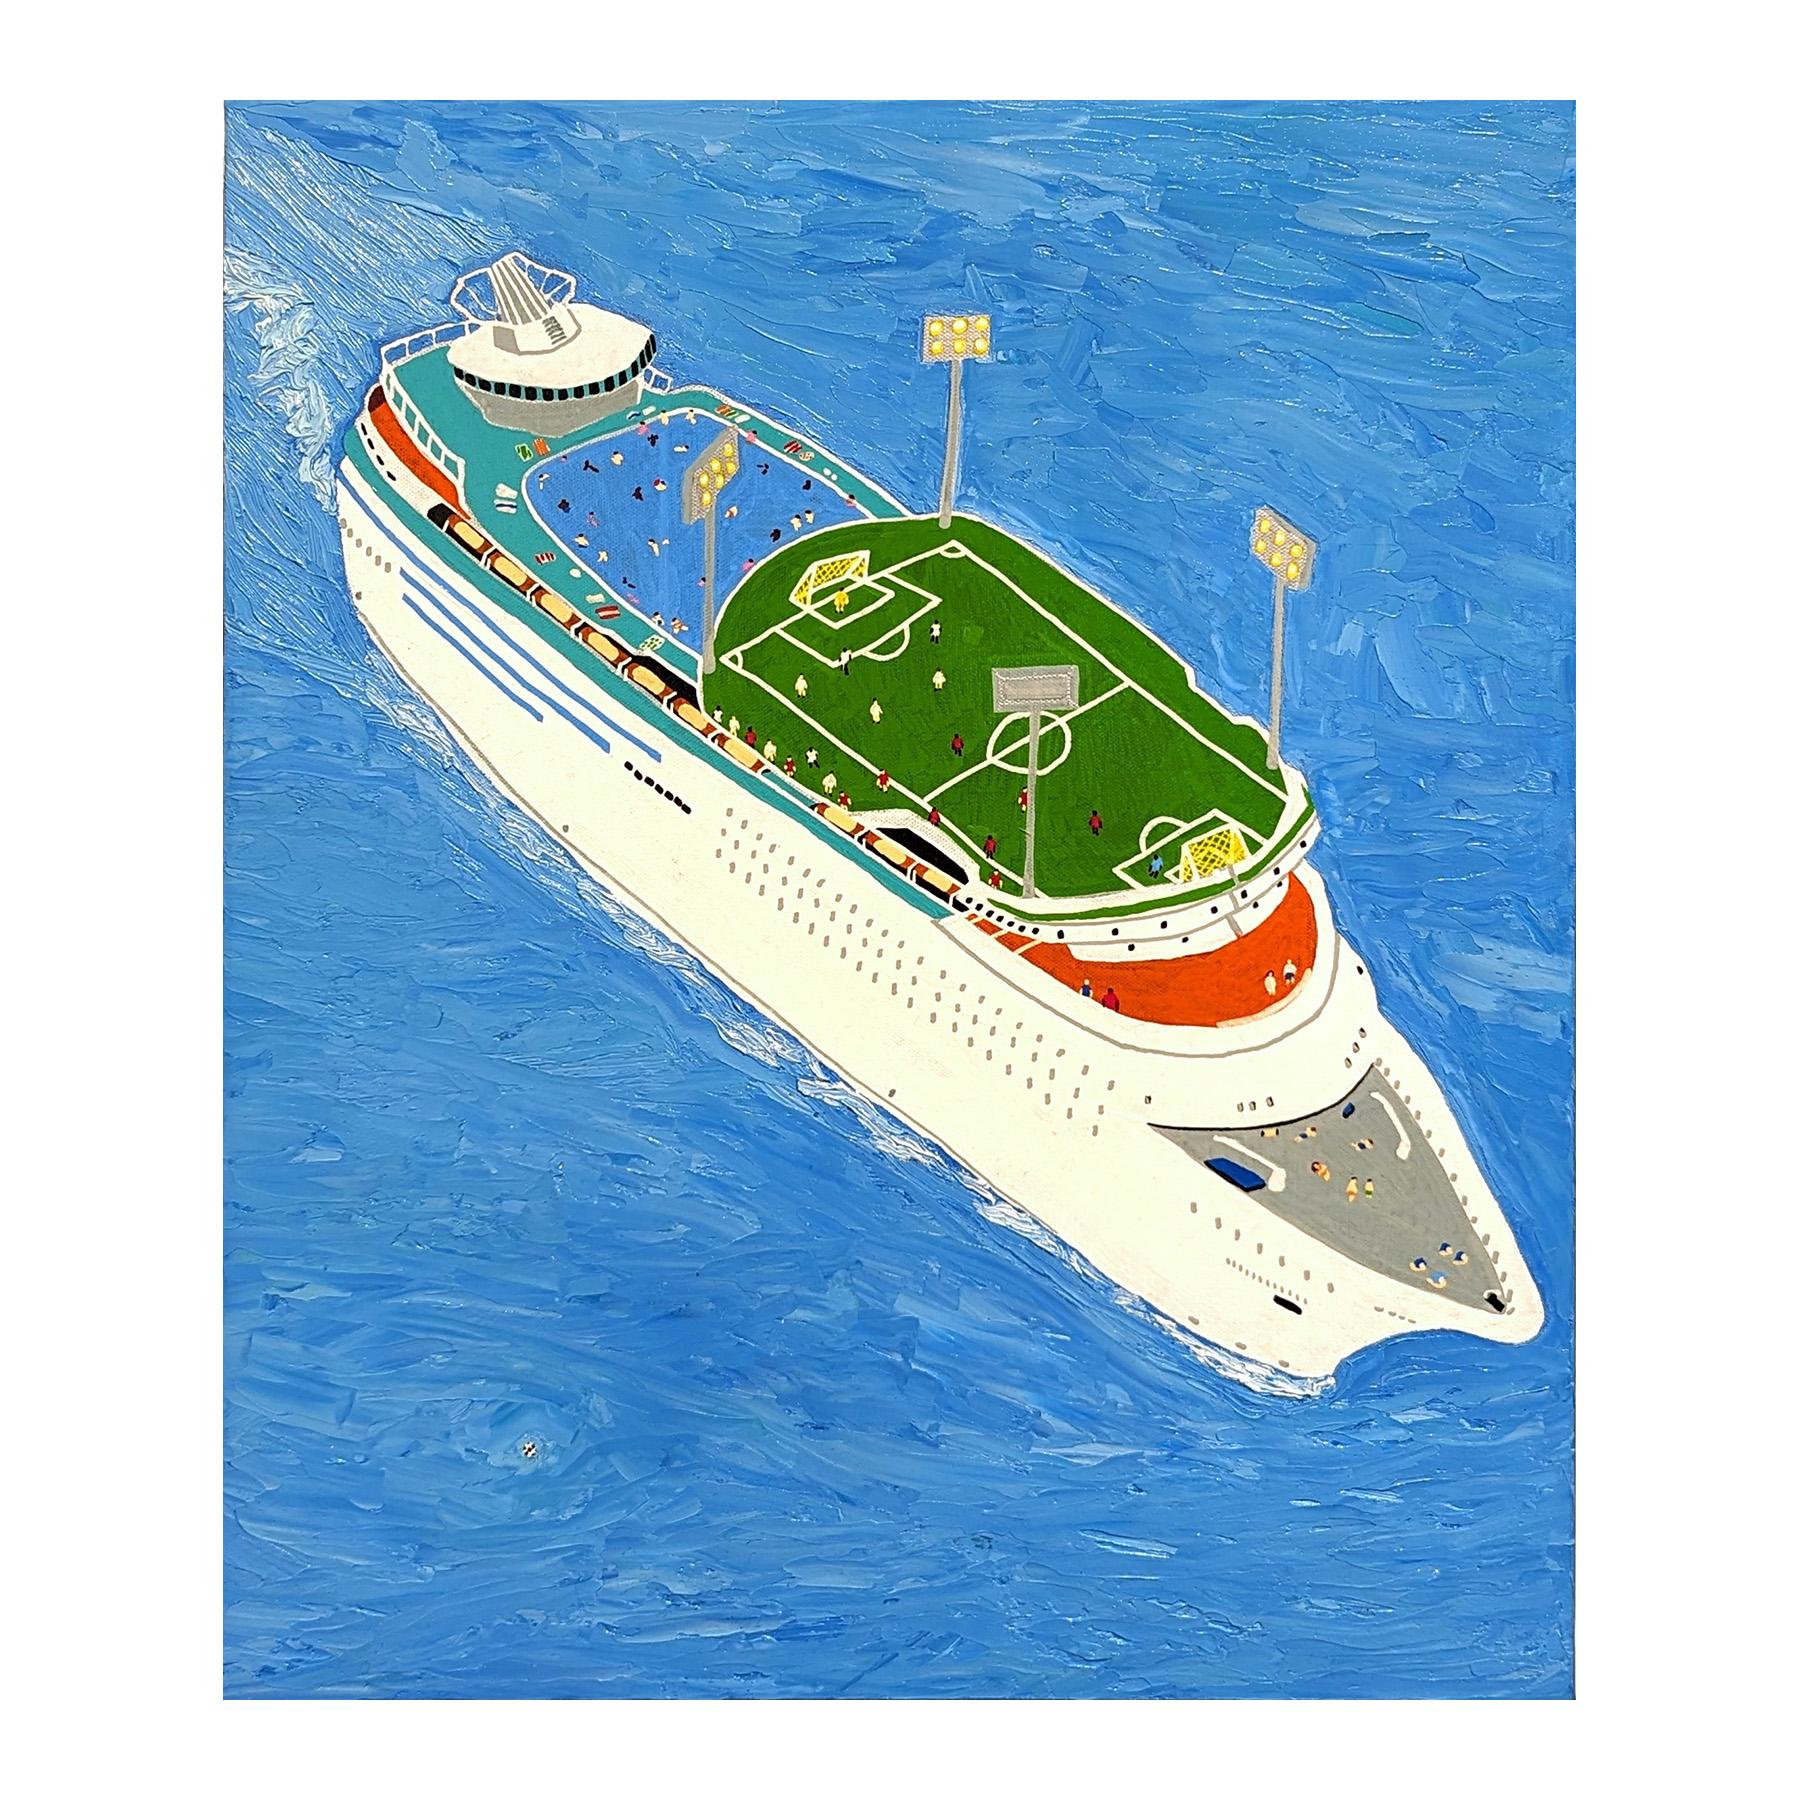 Das ist wohl das Spiel The Colorful Contemporary Humorous Ship Landscape Painting im Angebot 1